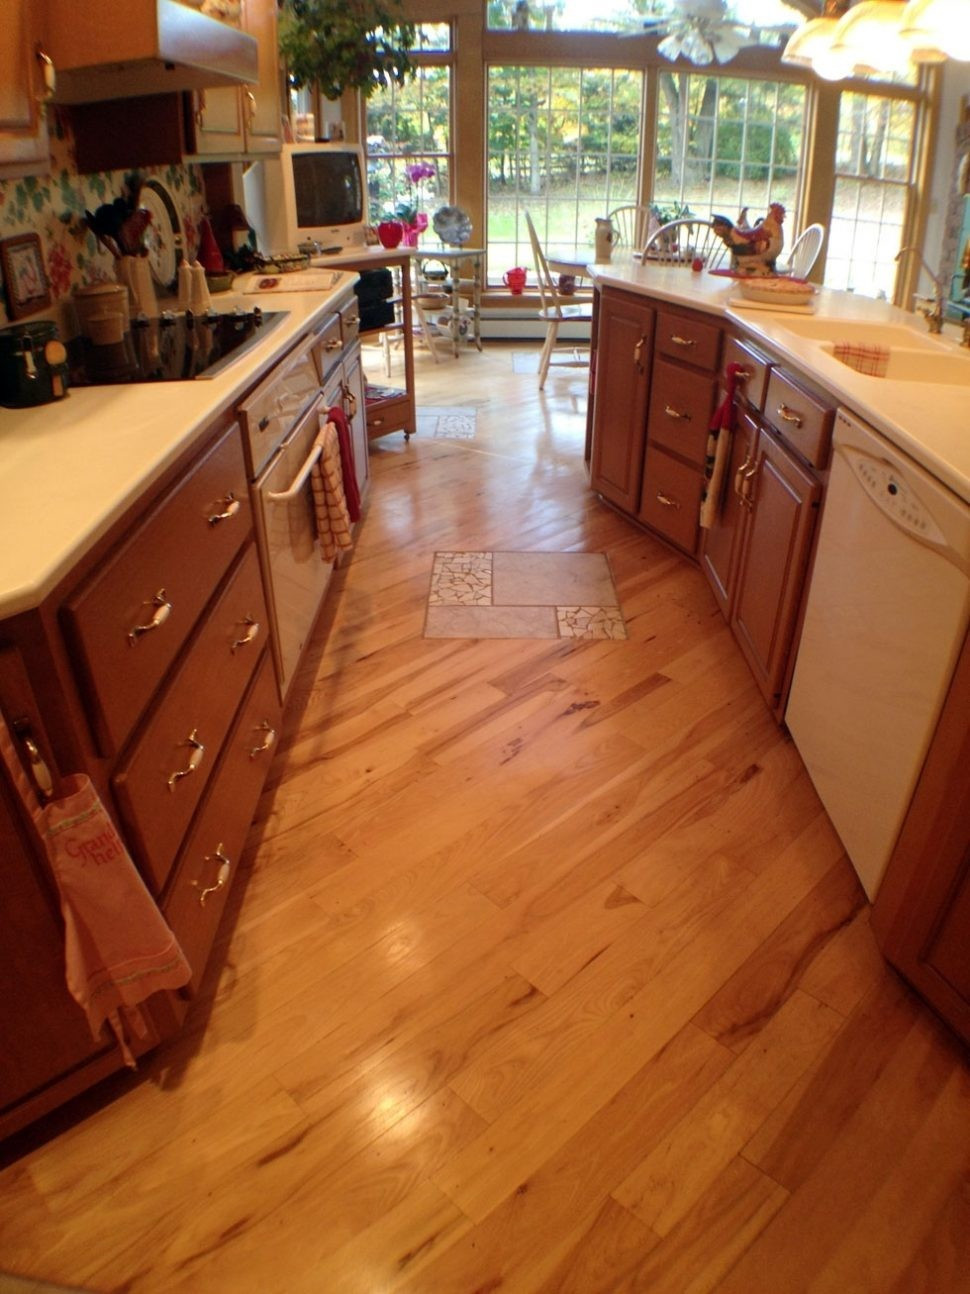 25 Nice How Much Does Restaining Hardwood Floors Cost 2022 free download how much does restaining hardwood floors cost of 17 new cost of hardwood floor installation pics dizpos com with regard to 16 lovely s hardwood floor installation cost